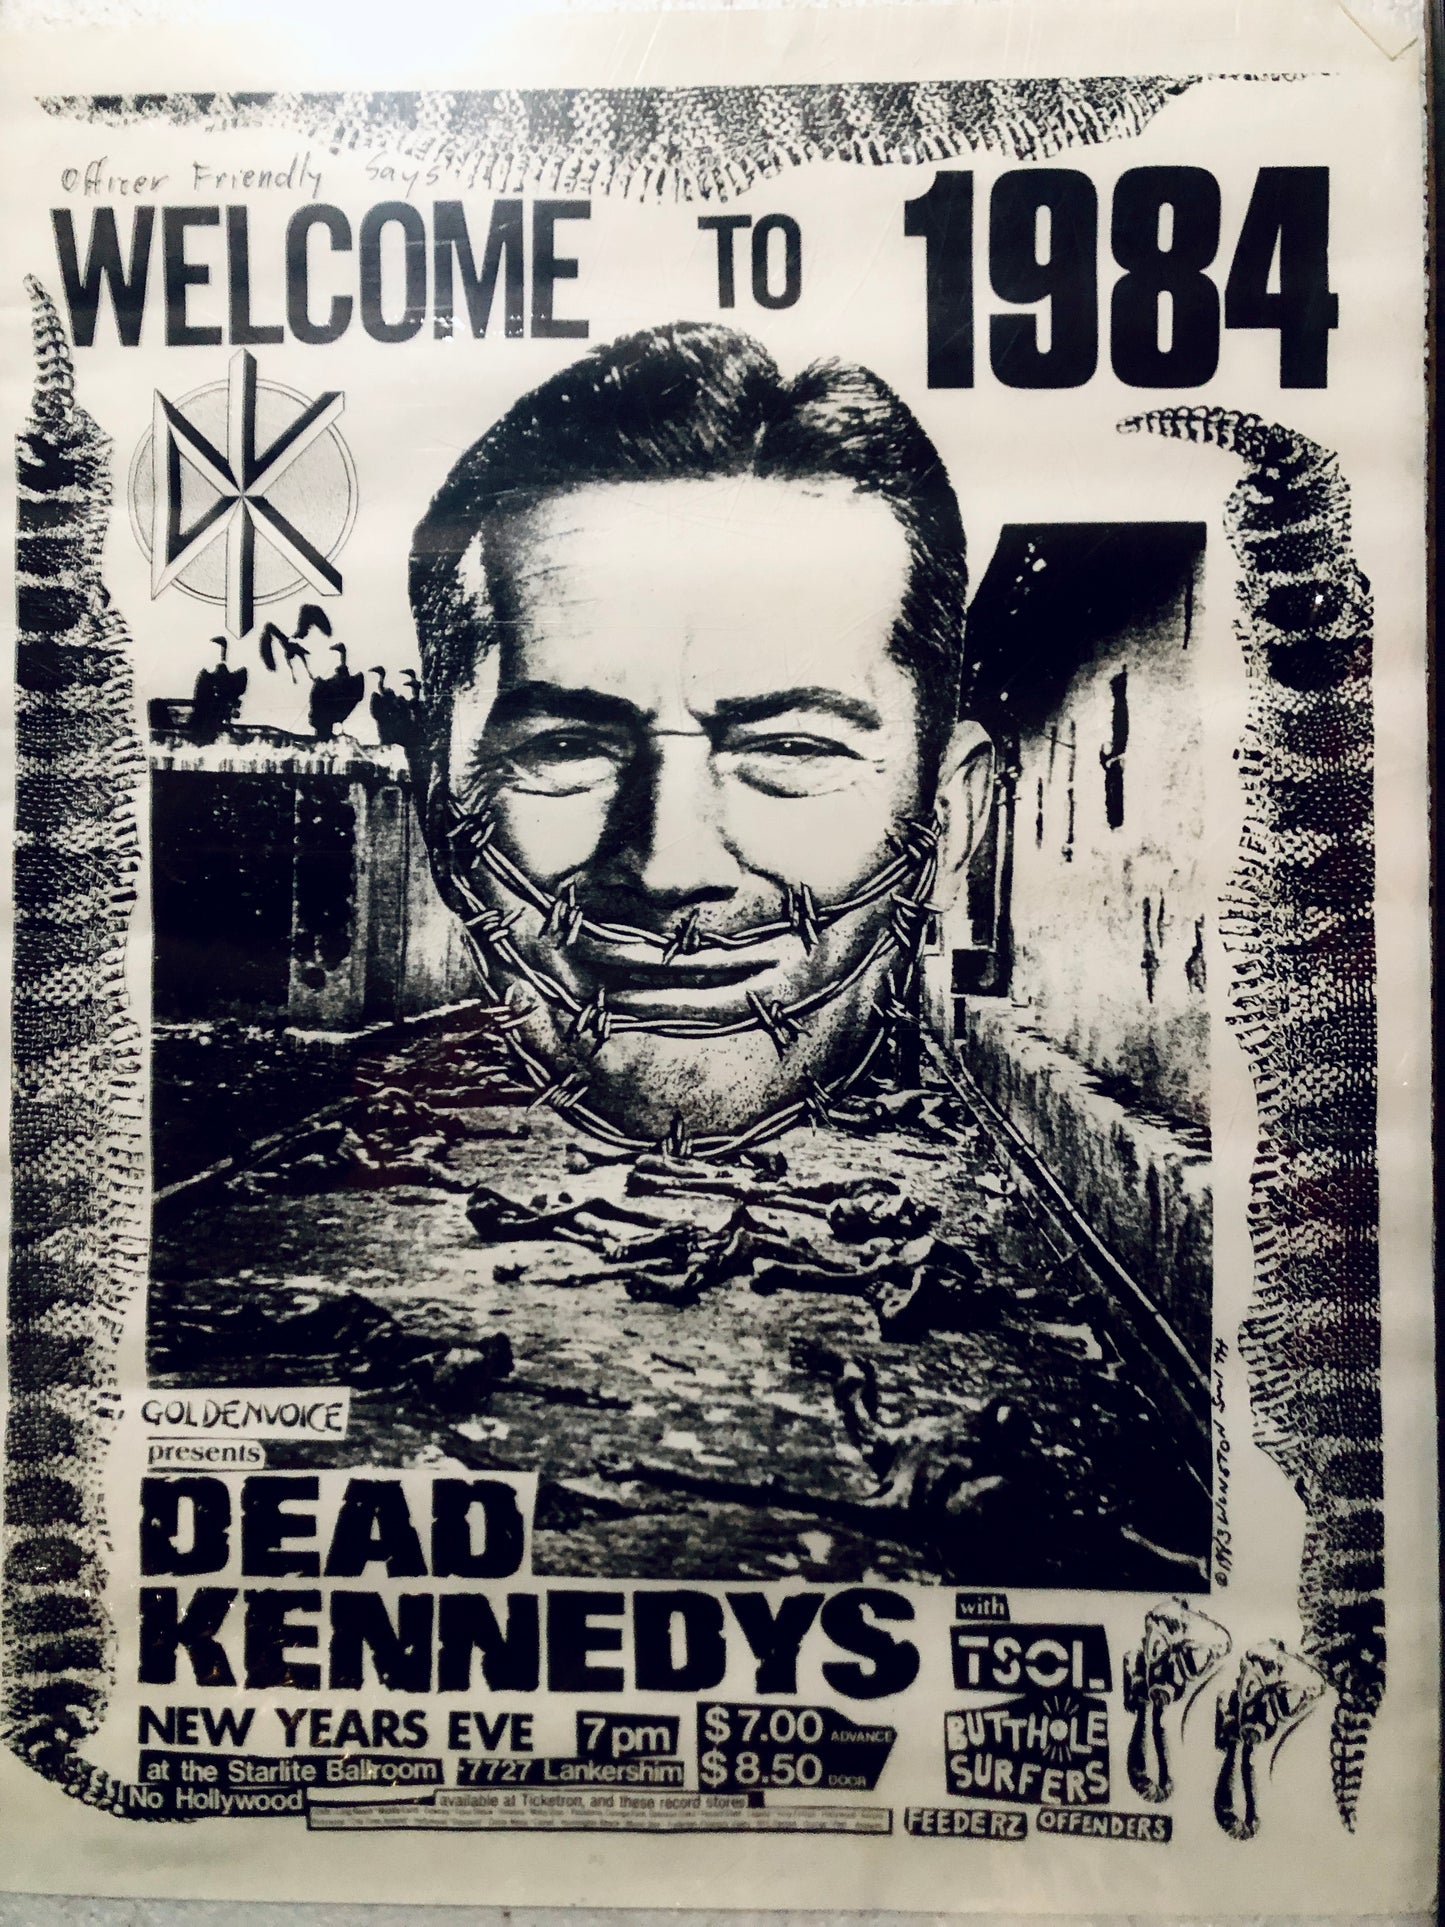 Winston Smith's Dead Kennedys "Welcome to 1984" Vintage Poster (1984)